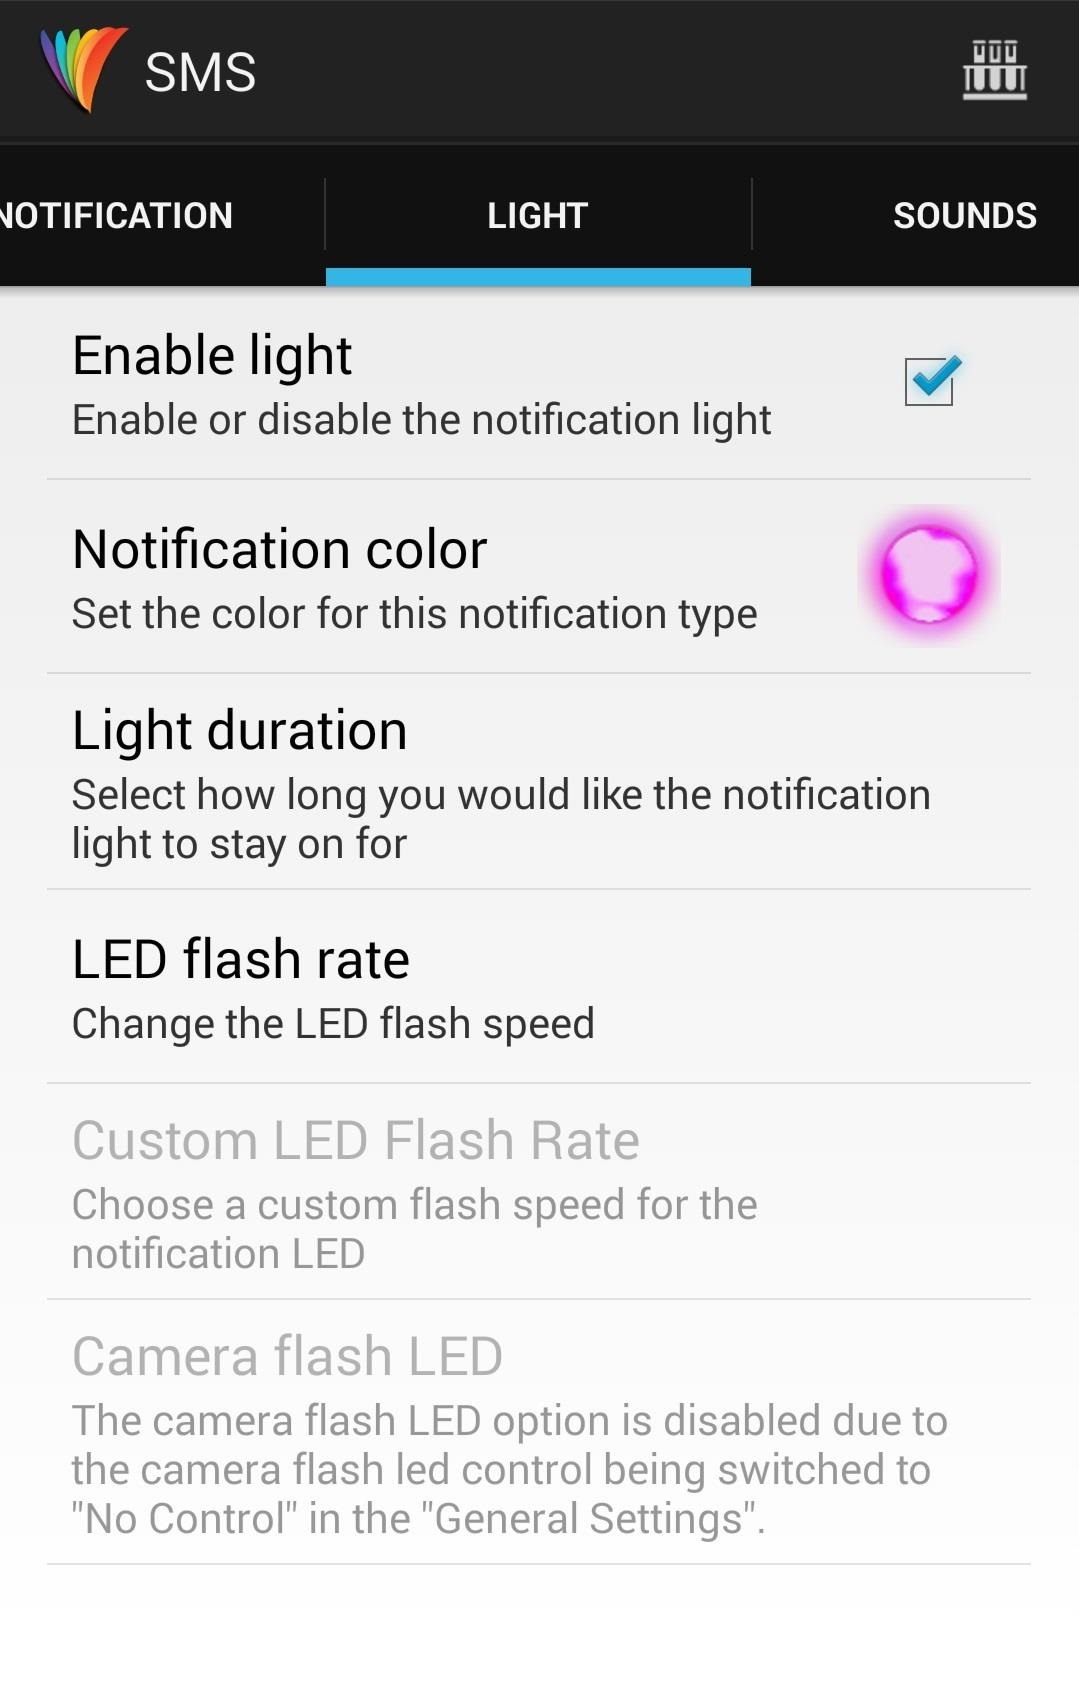 How to Completely Customize the LED Notification Colors on Your Nexus 5 Without Rooting